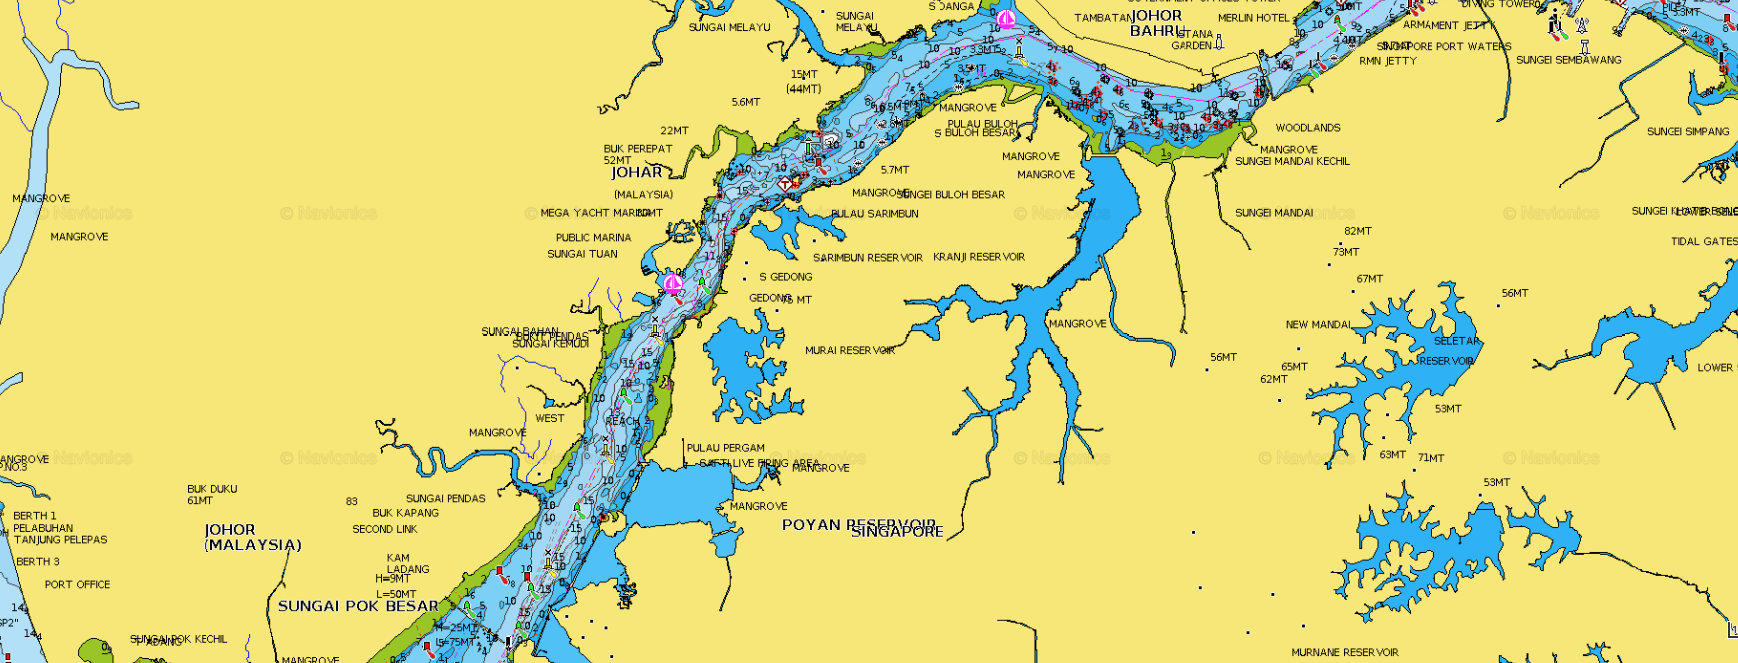 Singapore marine guide maritime port authority Singapore restricted areas north west